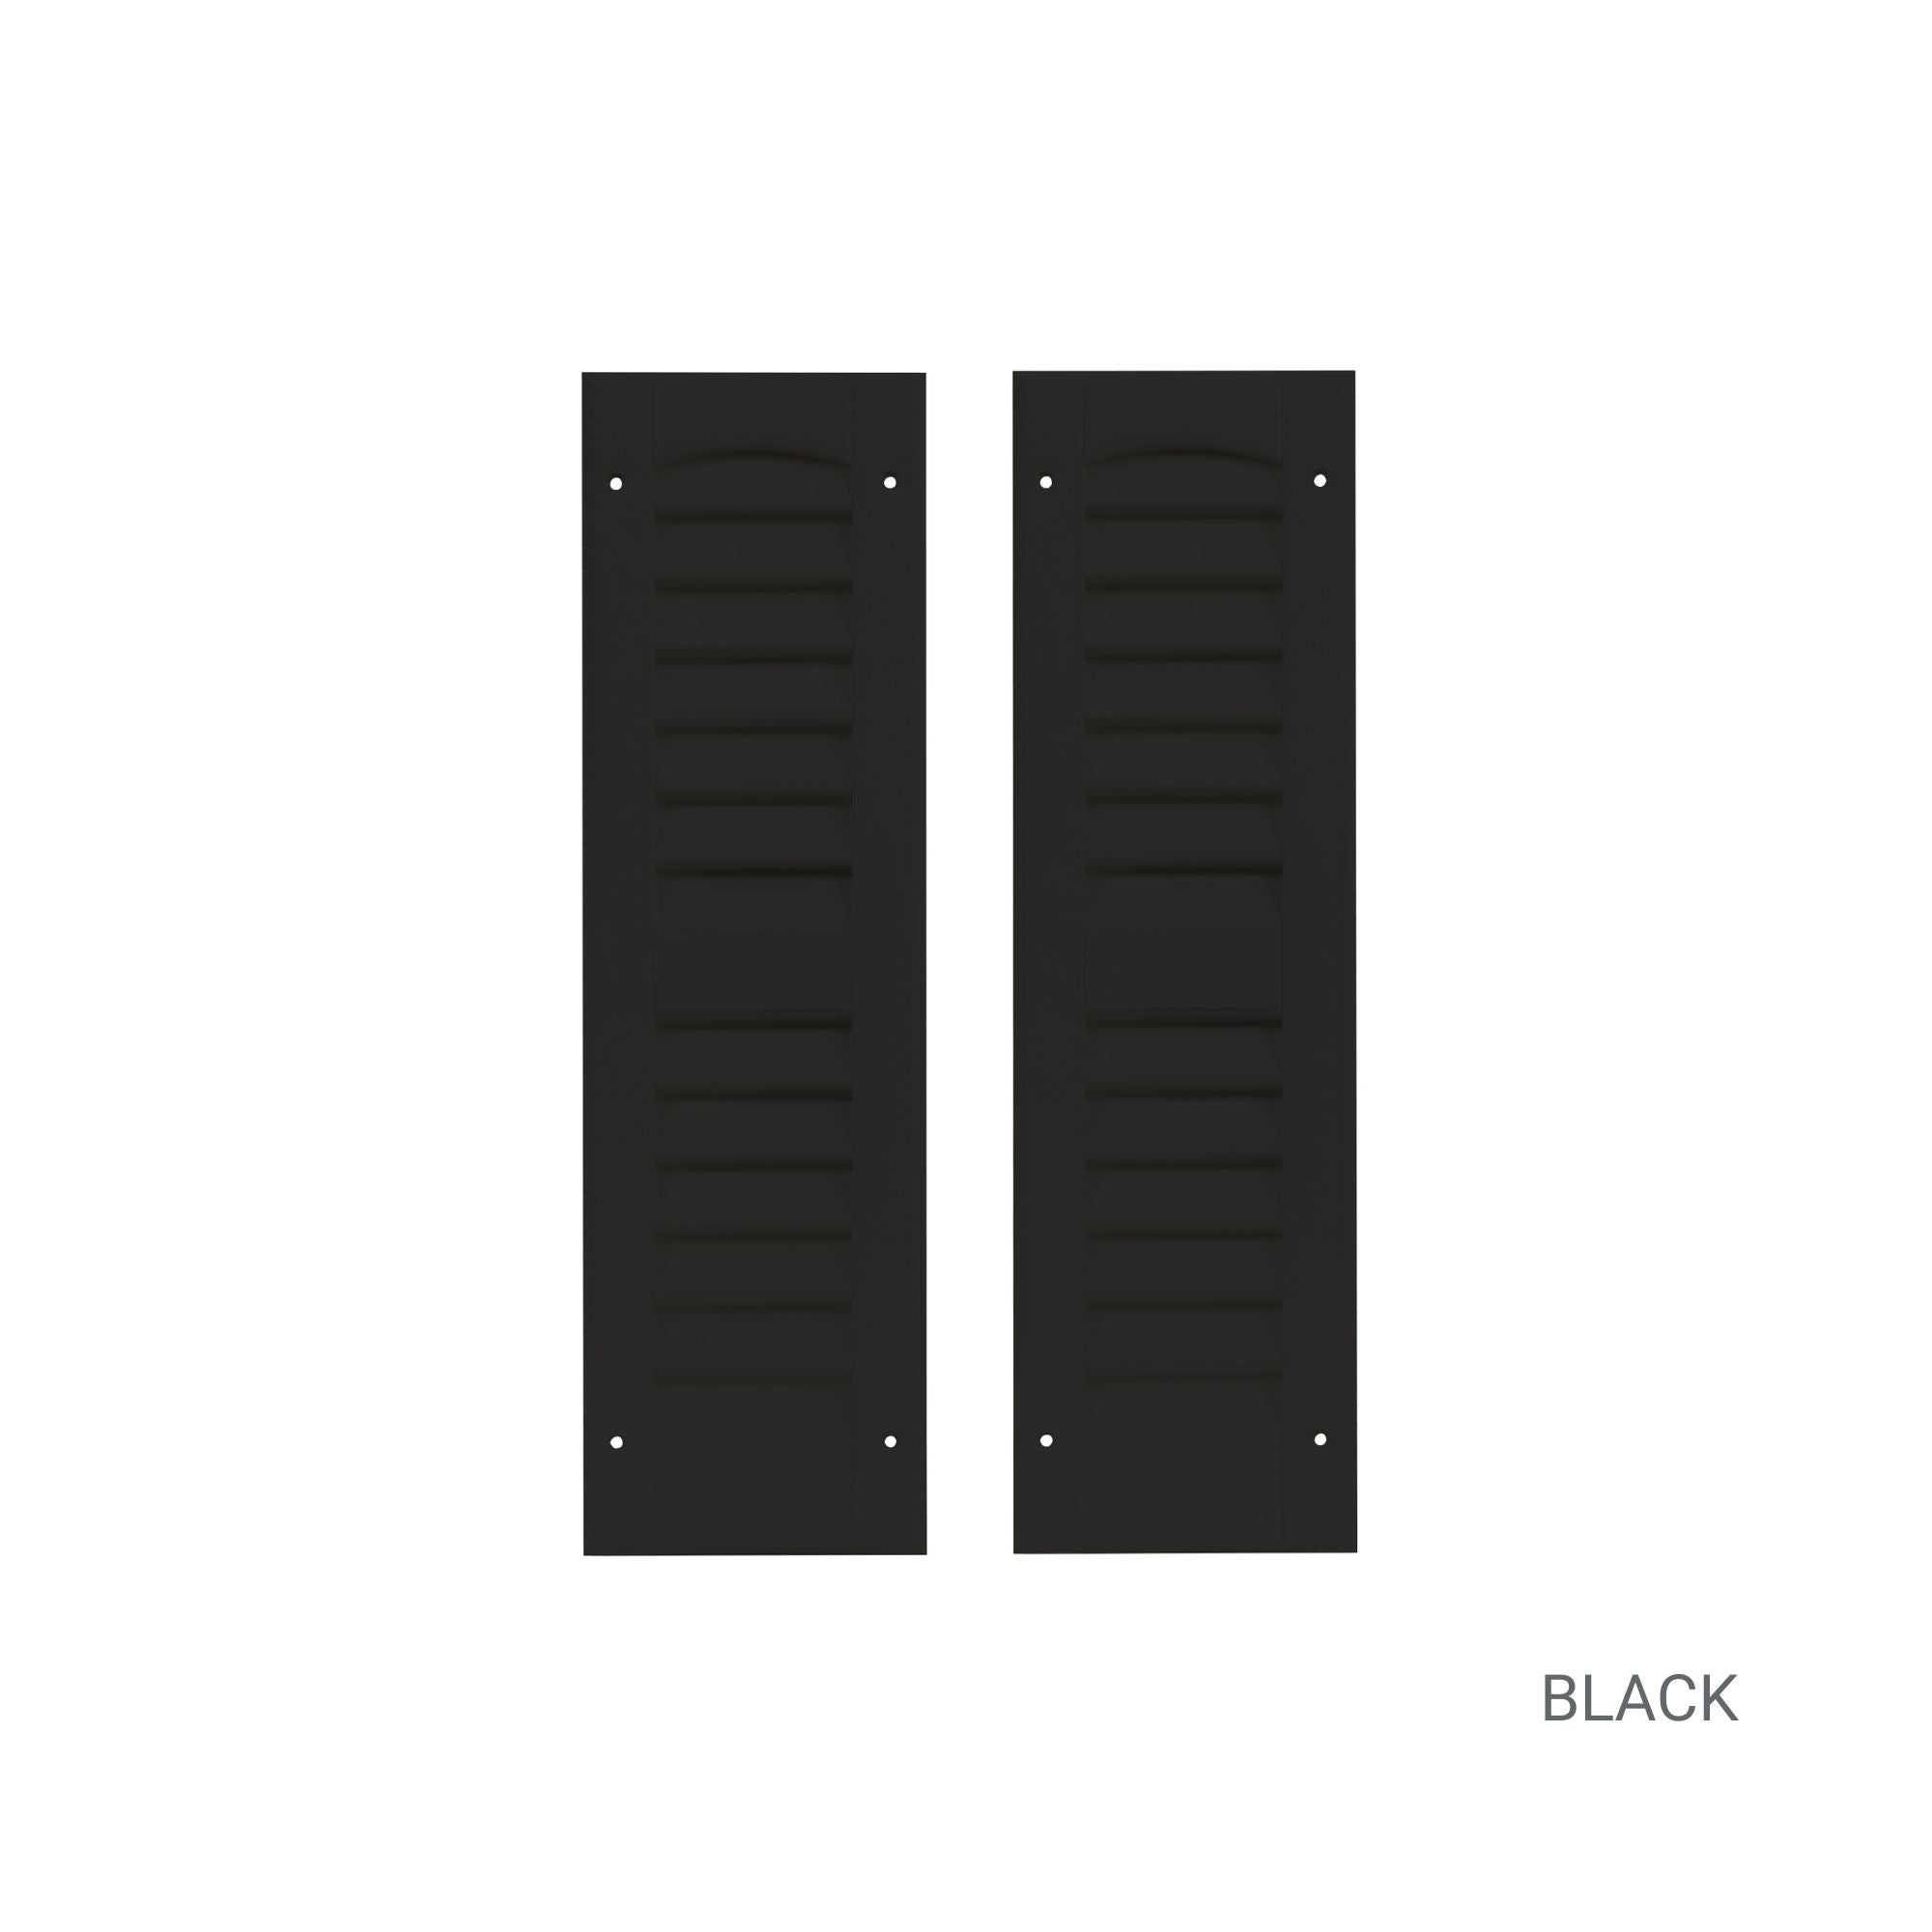 Pair of 6" W x 21" H Louvered Black Shutters for Sheds, Playhouses, and MORE